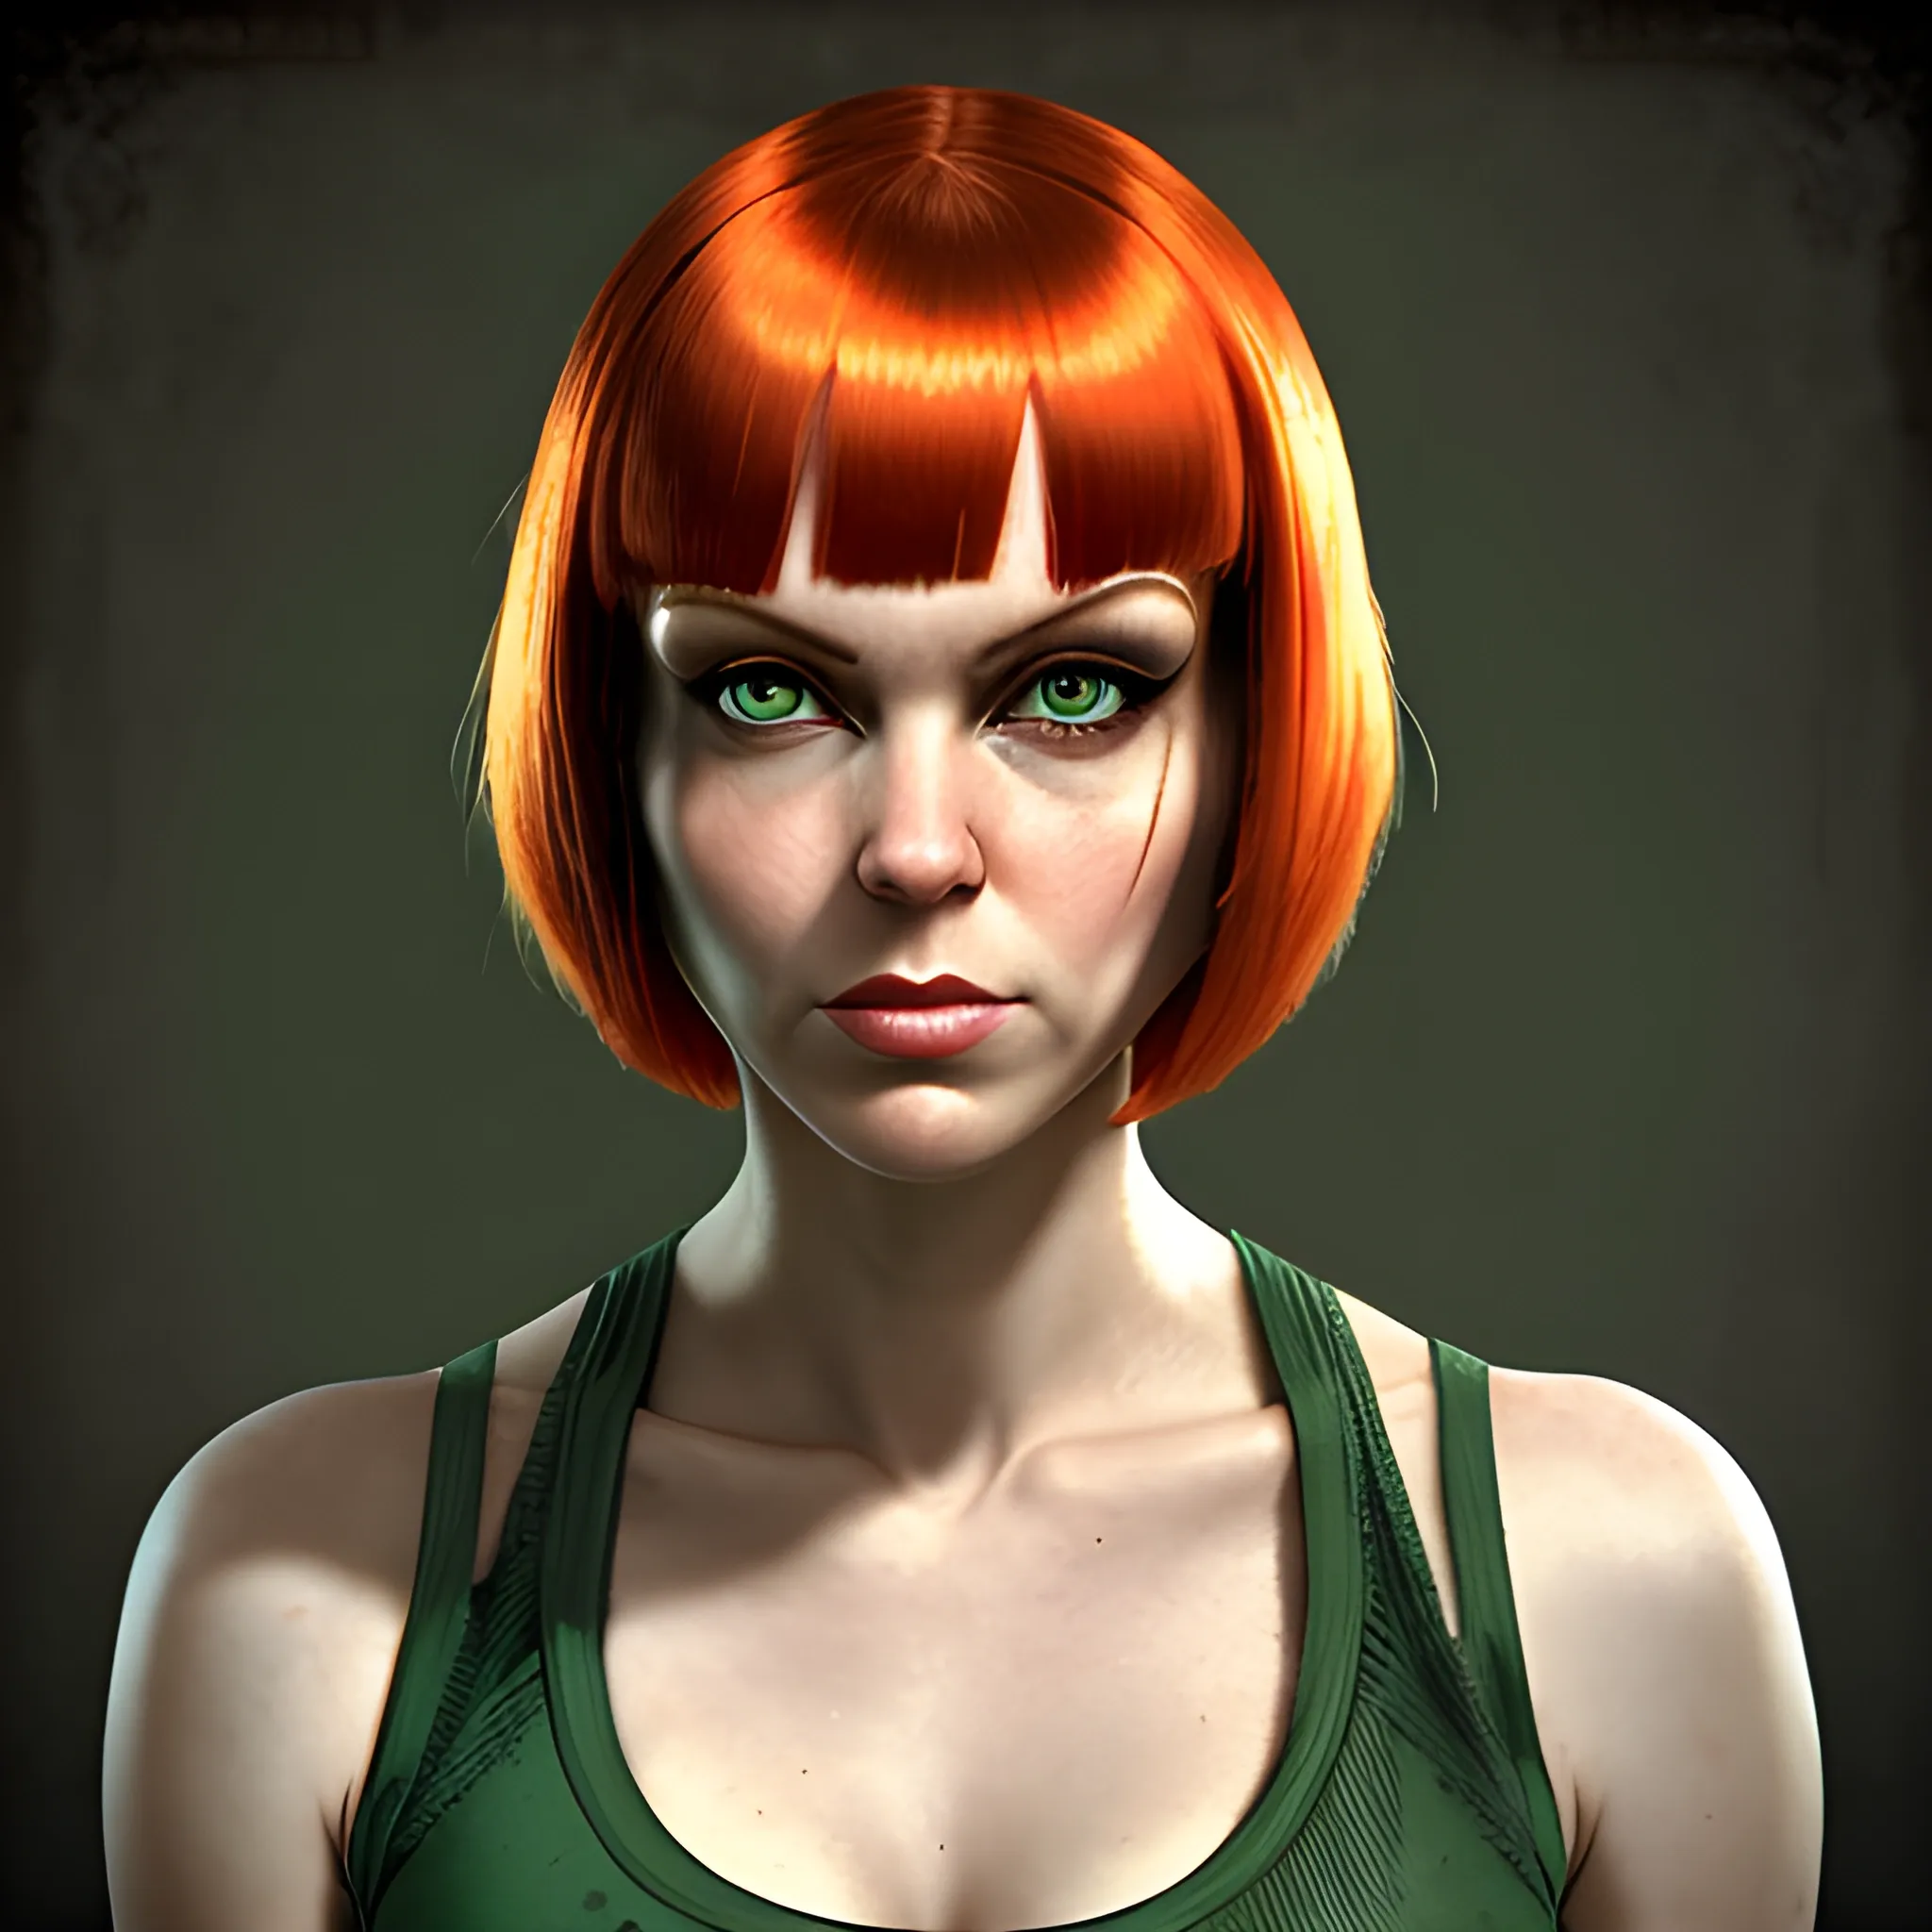 In the style of Fallout 1, (masterpiece), (portrait photography), (portrait of an adult Caucasian female), Leeloo from the 5th Element, choppy bob hairstyle, bob hairstyle, green eyes, white tanktop, exposed midriff